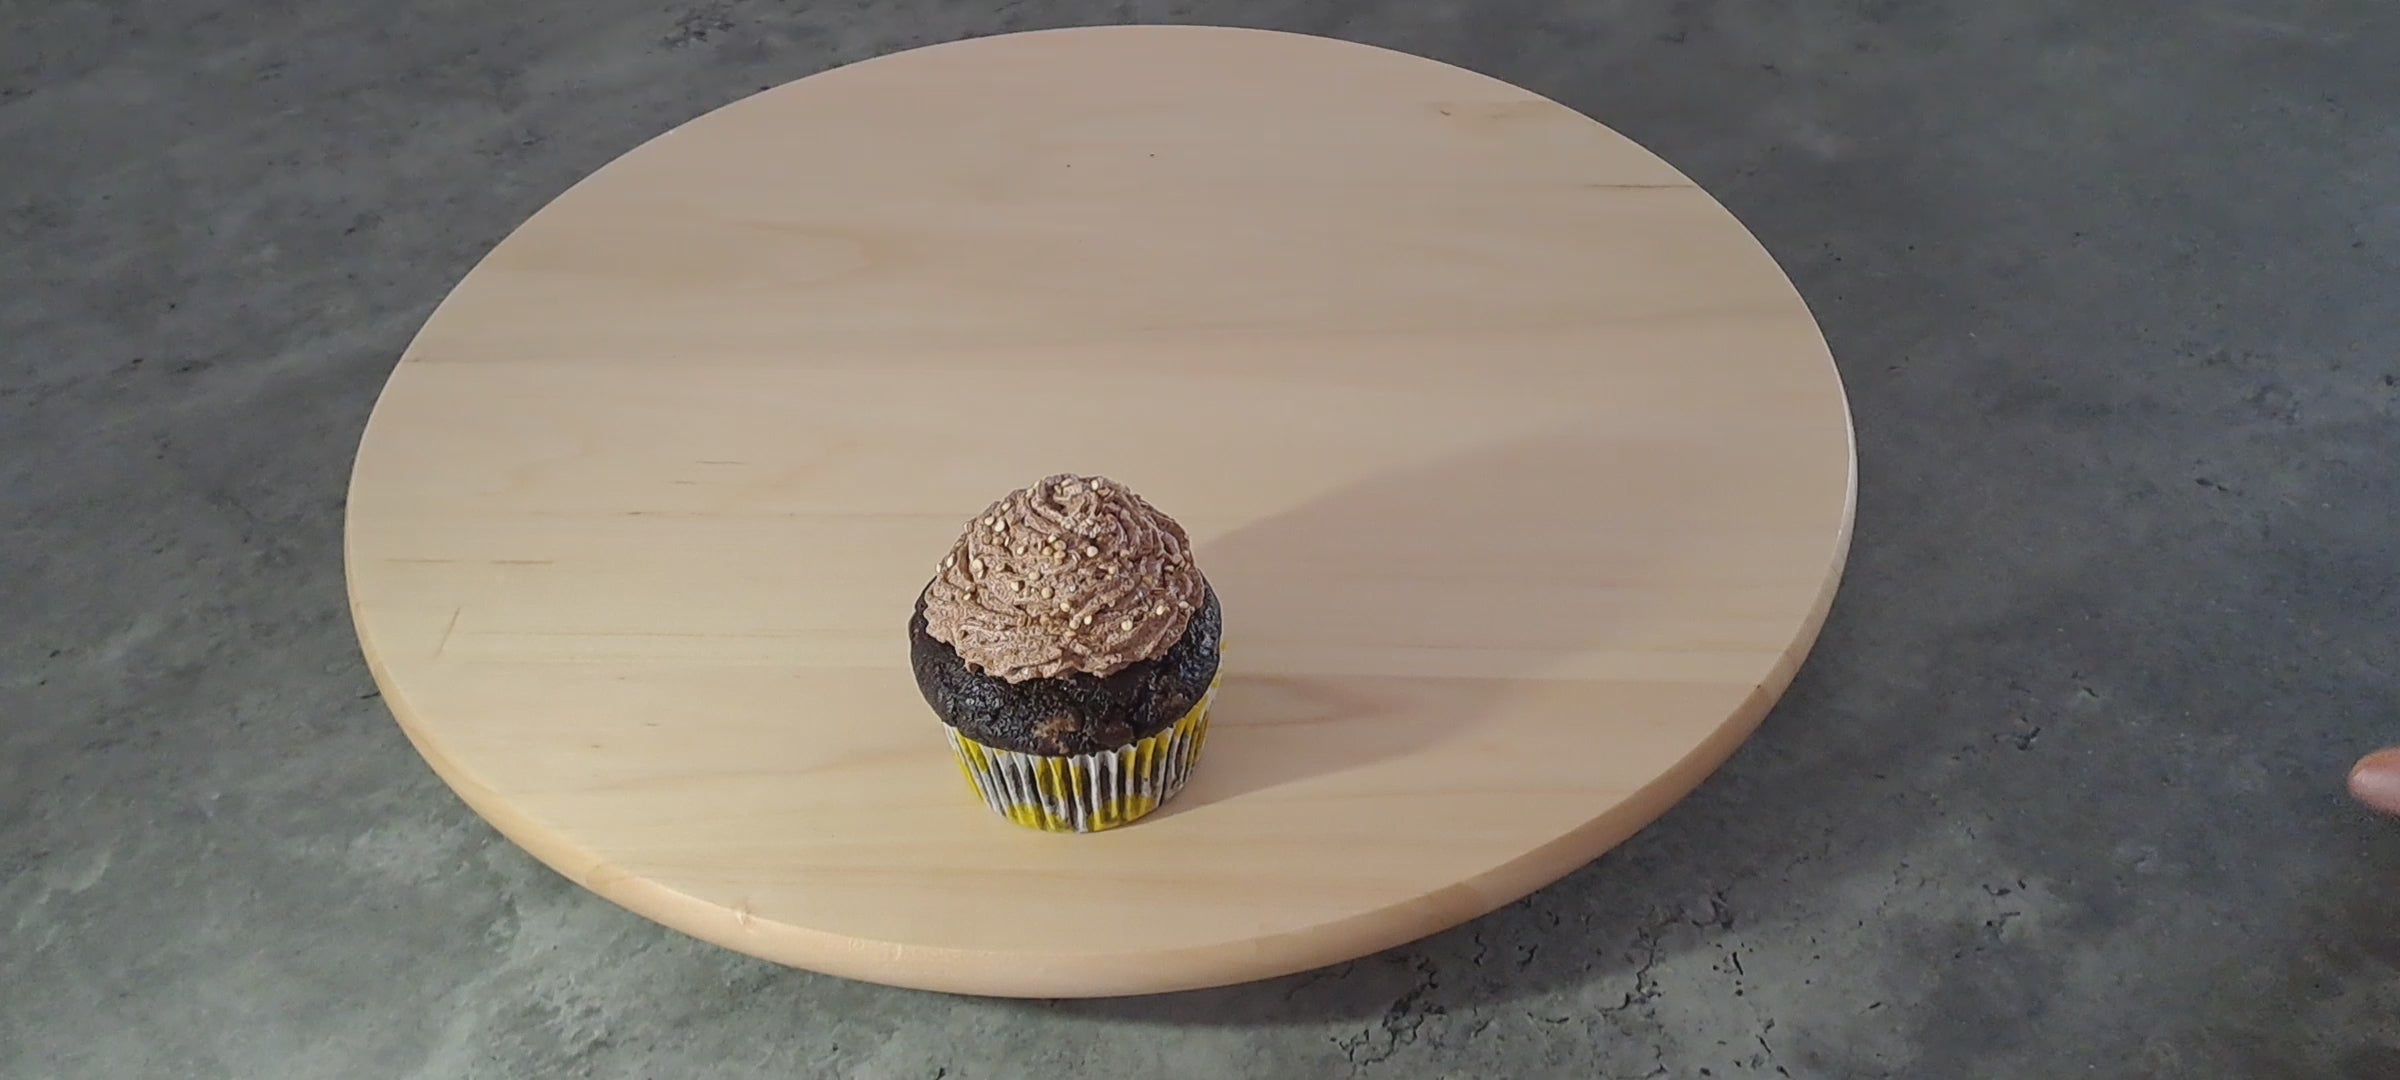 Video laden: A short video of vegan chocolate muffins being put on a wooden plate 